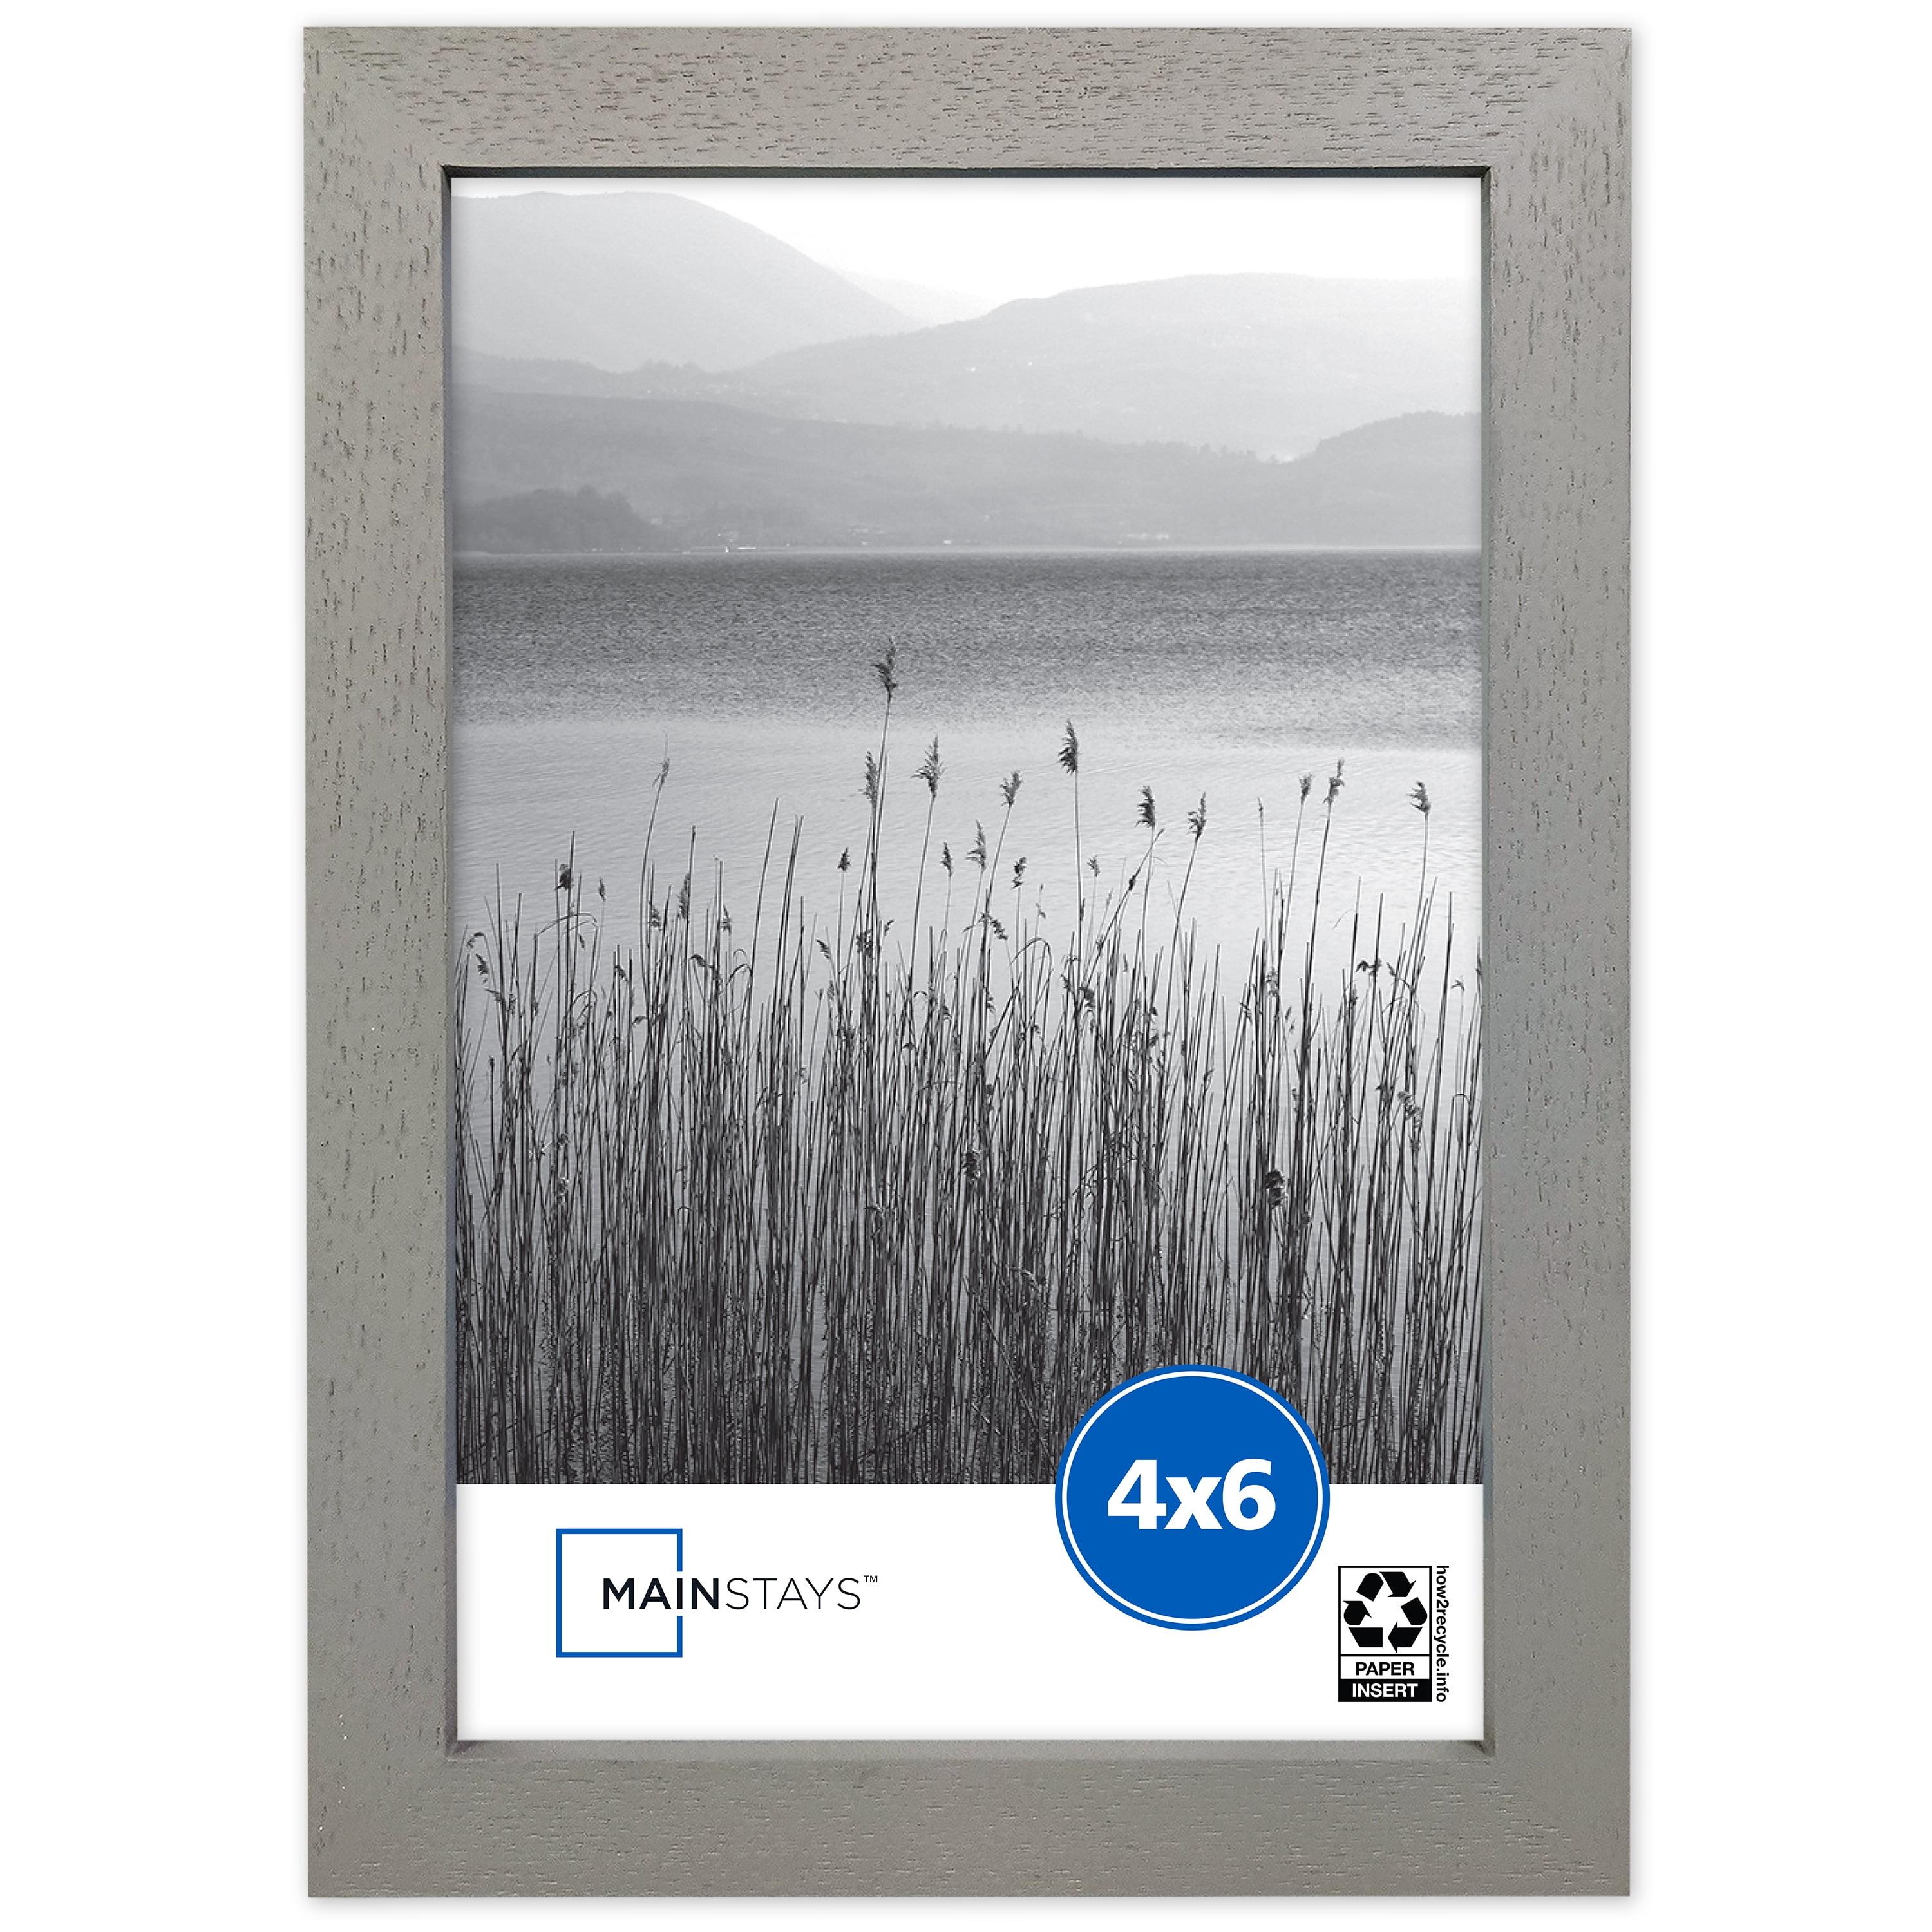 Betus 8x10 White Picture Mats White Core Bevel Cut for 5x7 Pictures 10 Pack 